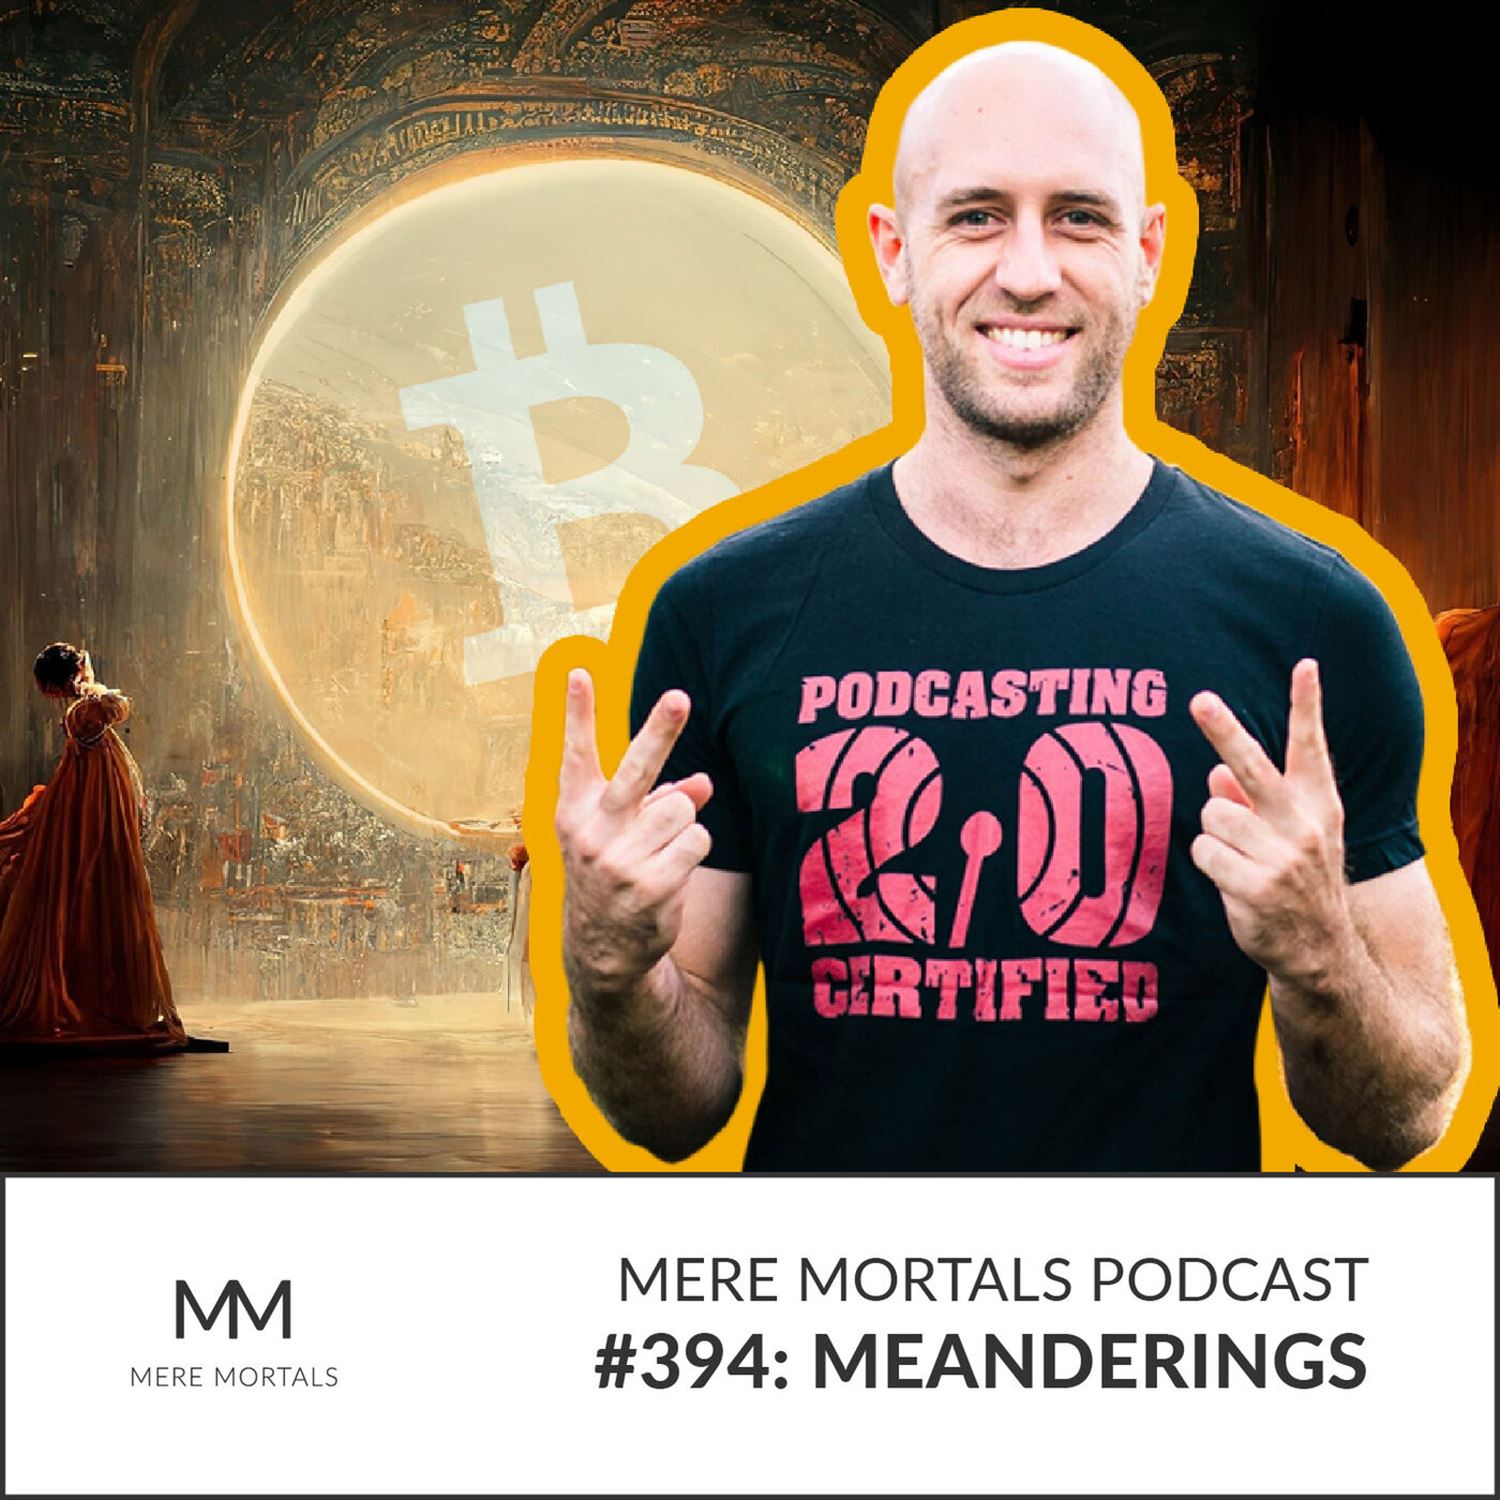 Podcasting 2.0 & Value For Value | Delivering On The Promise Of Bitcoin